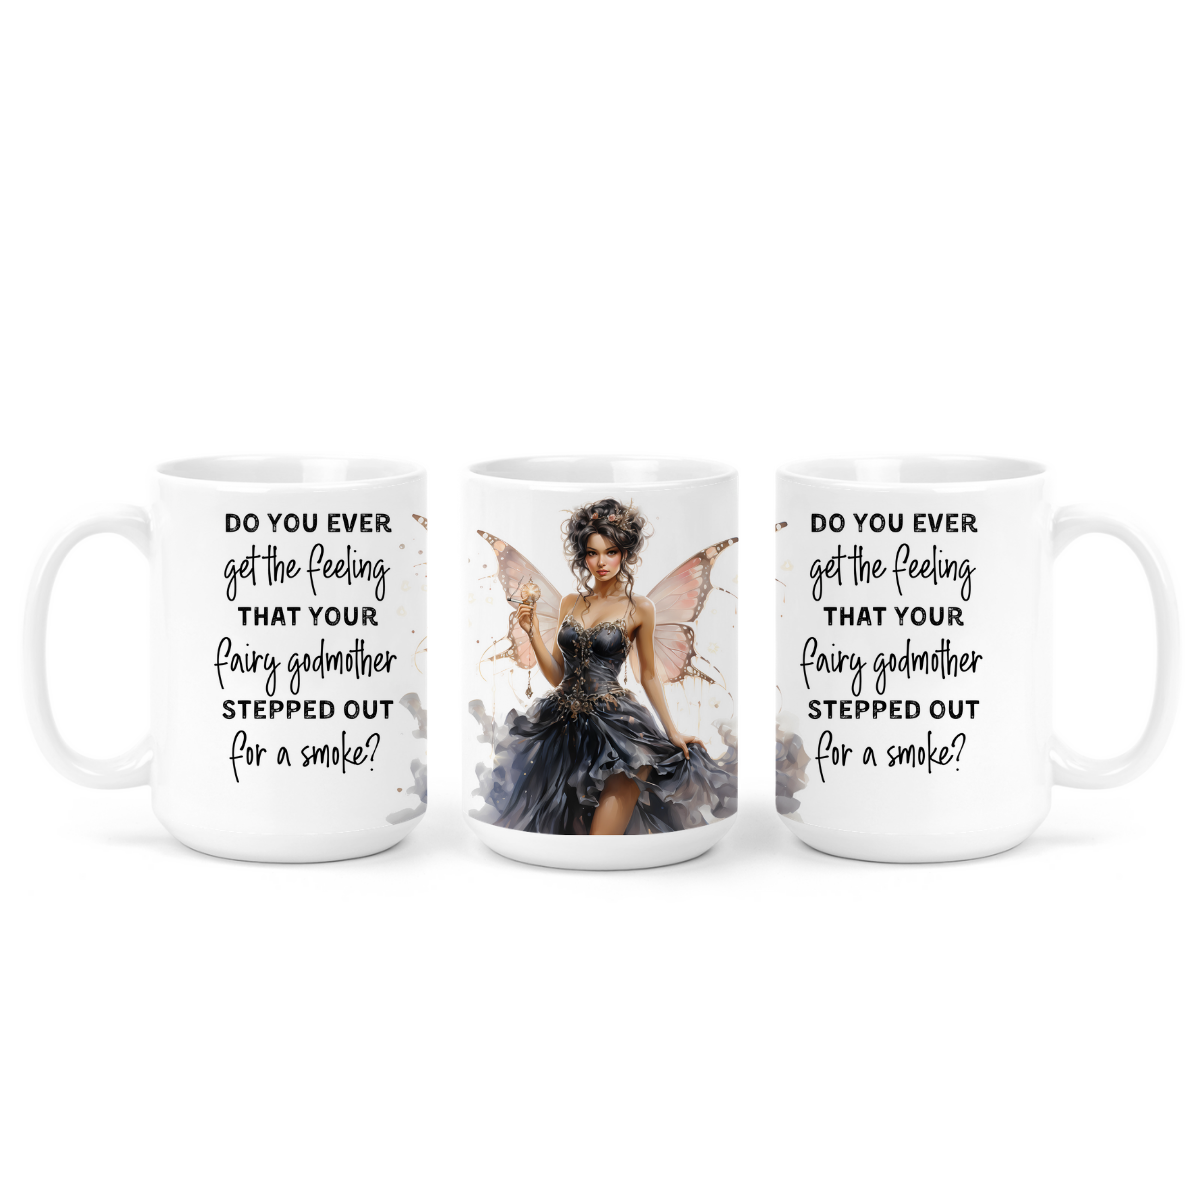 Fairy Godmother Stepped Out For A Smoke | Mug - The Pretty Things.ca